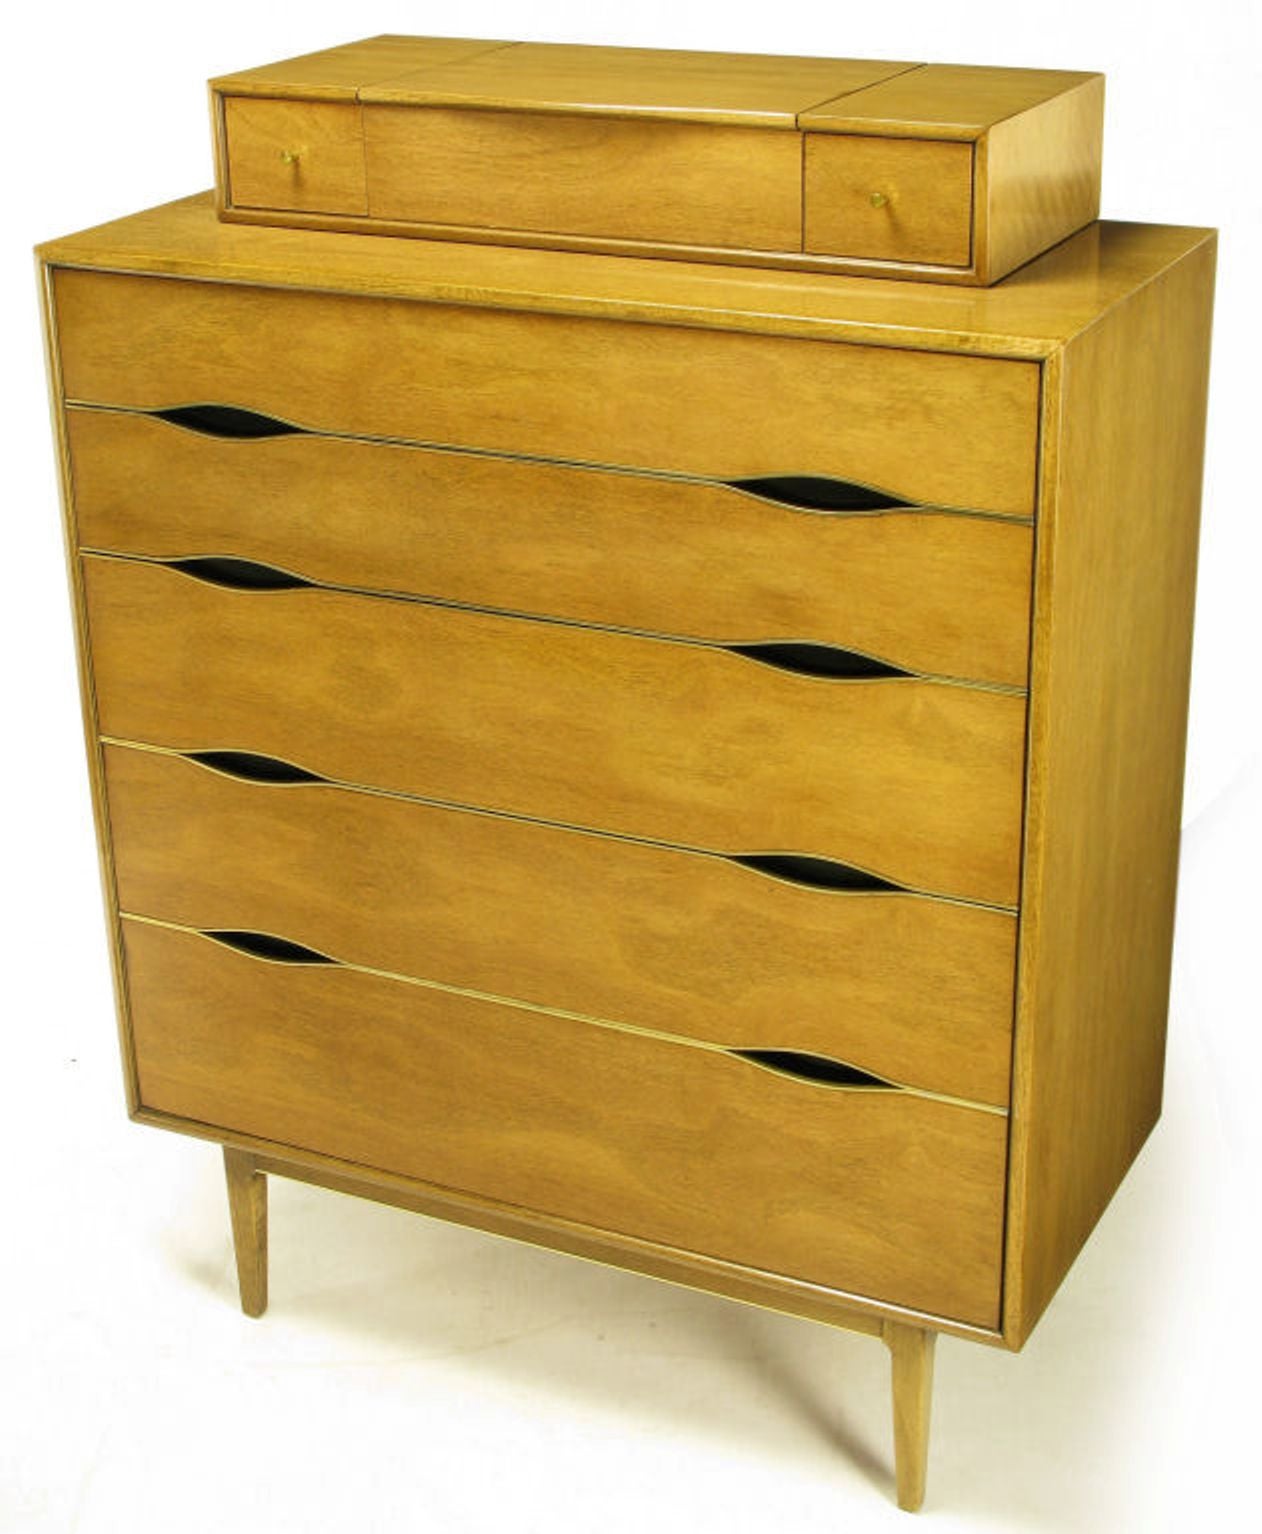 Vignola Furniture Bleached Walnut and Brass Five-Drawer Tall Chest